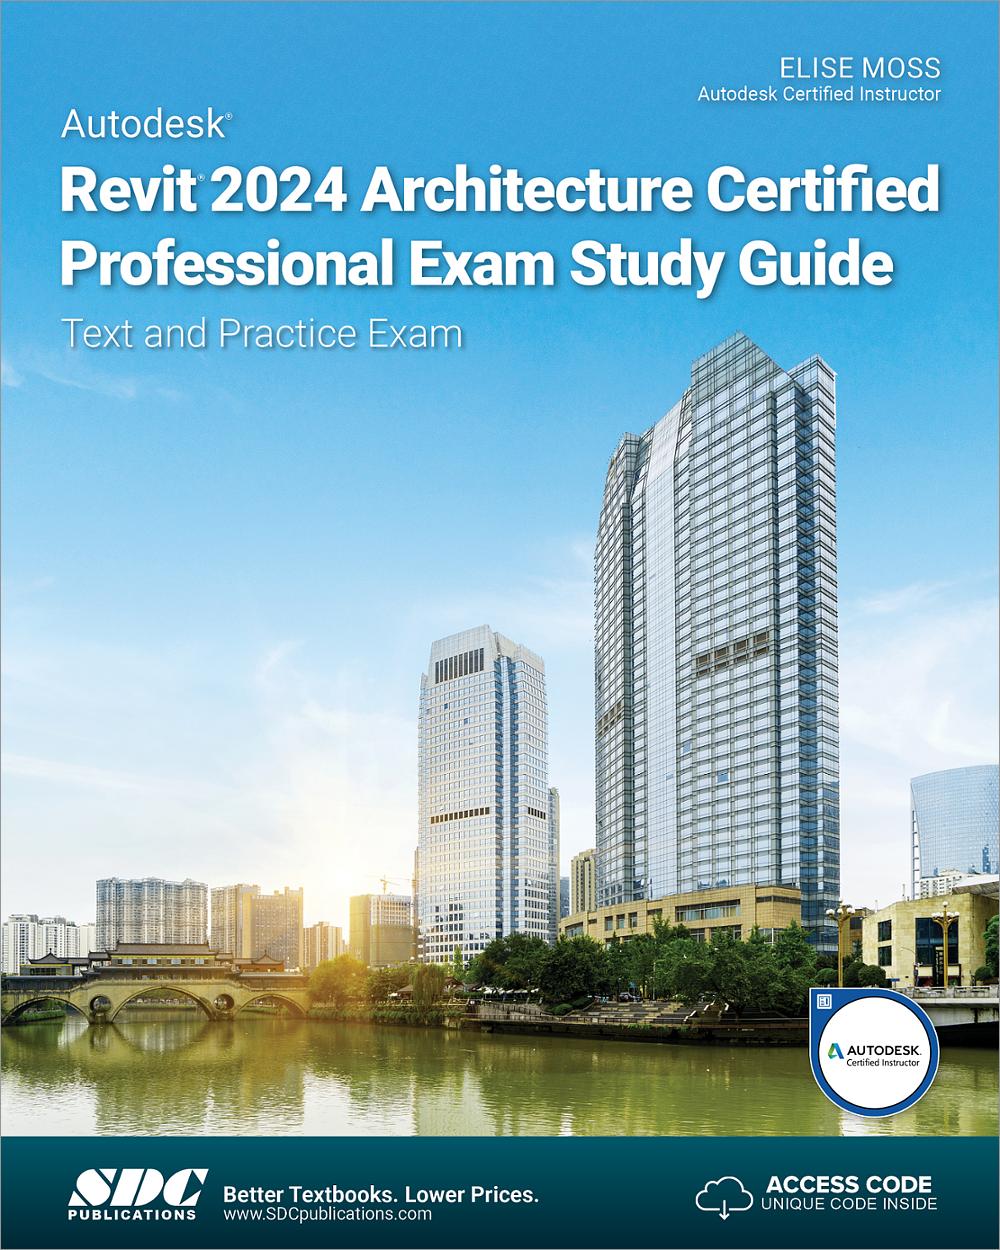 Autodesk Revit 2024 Architecture Certified Professional Exam Study Guide, Book 9781630575977